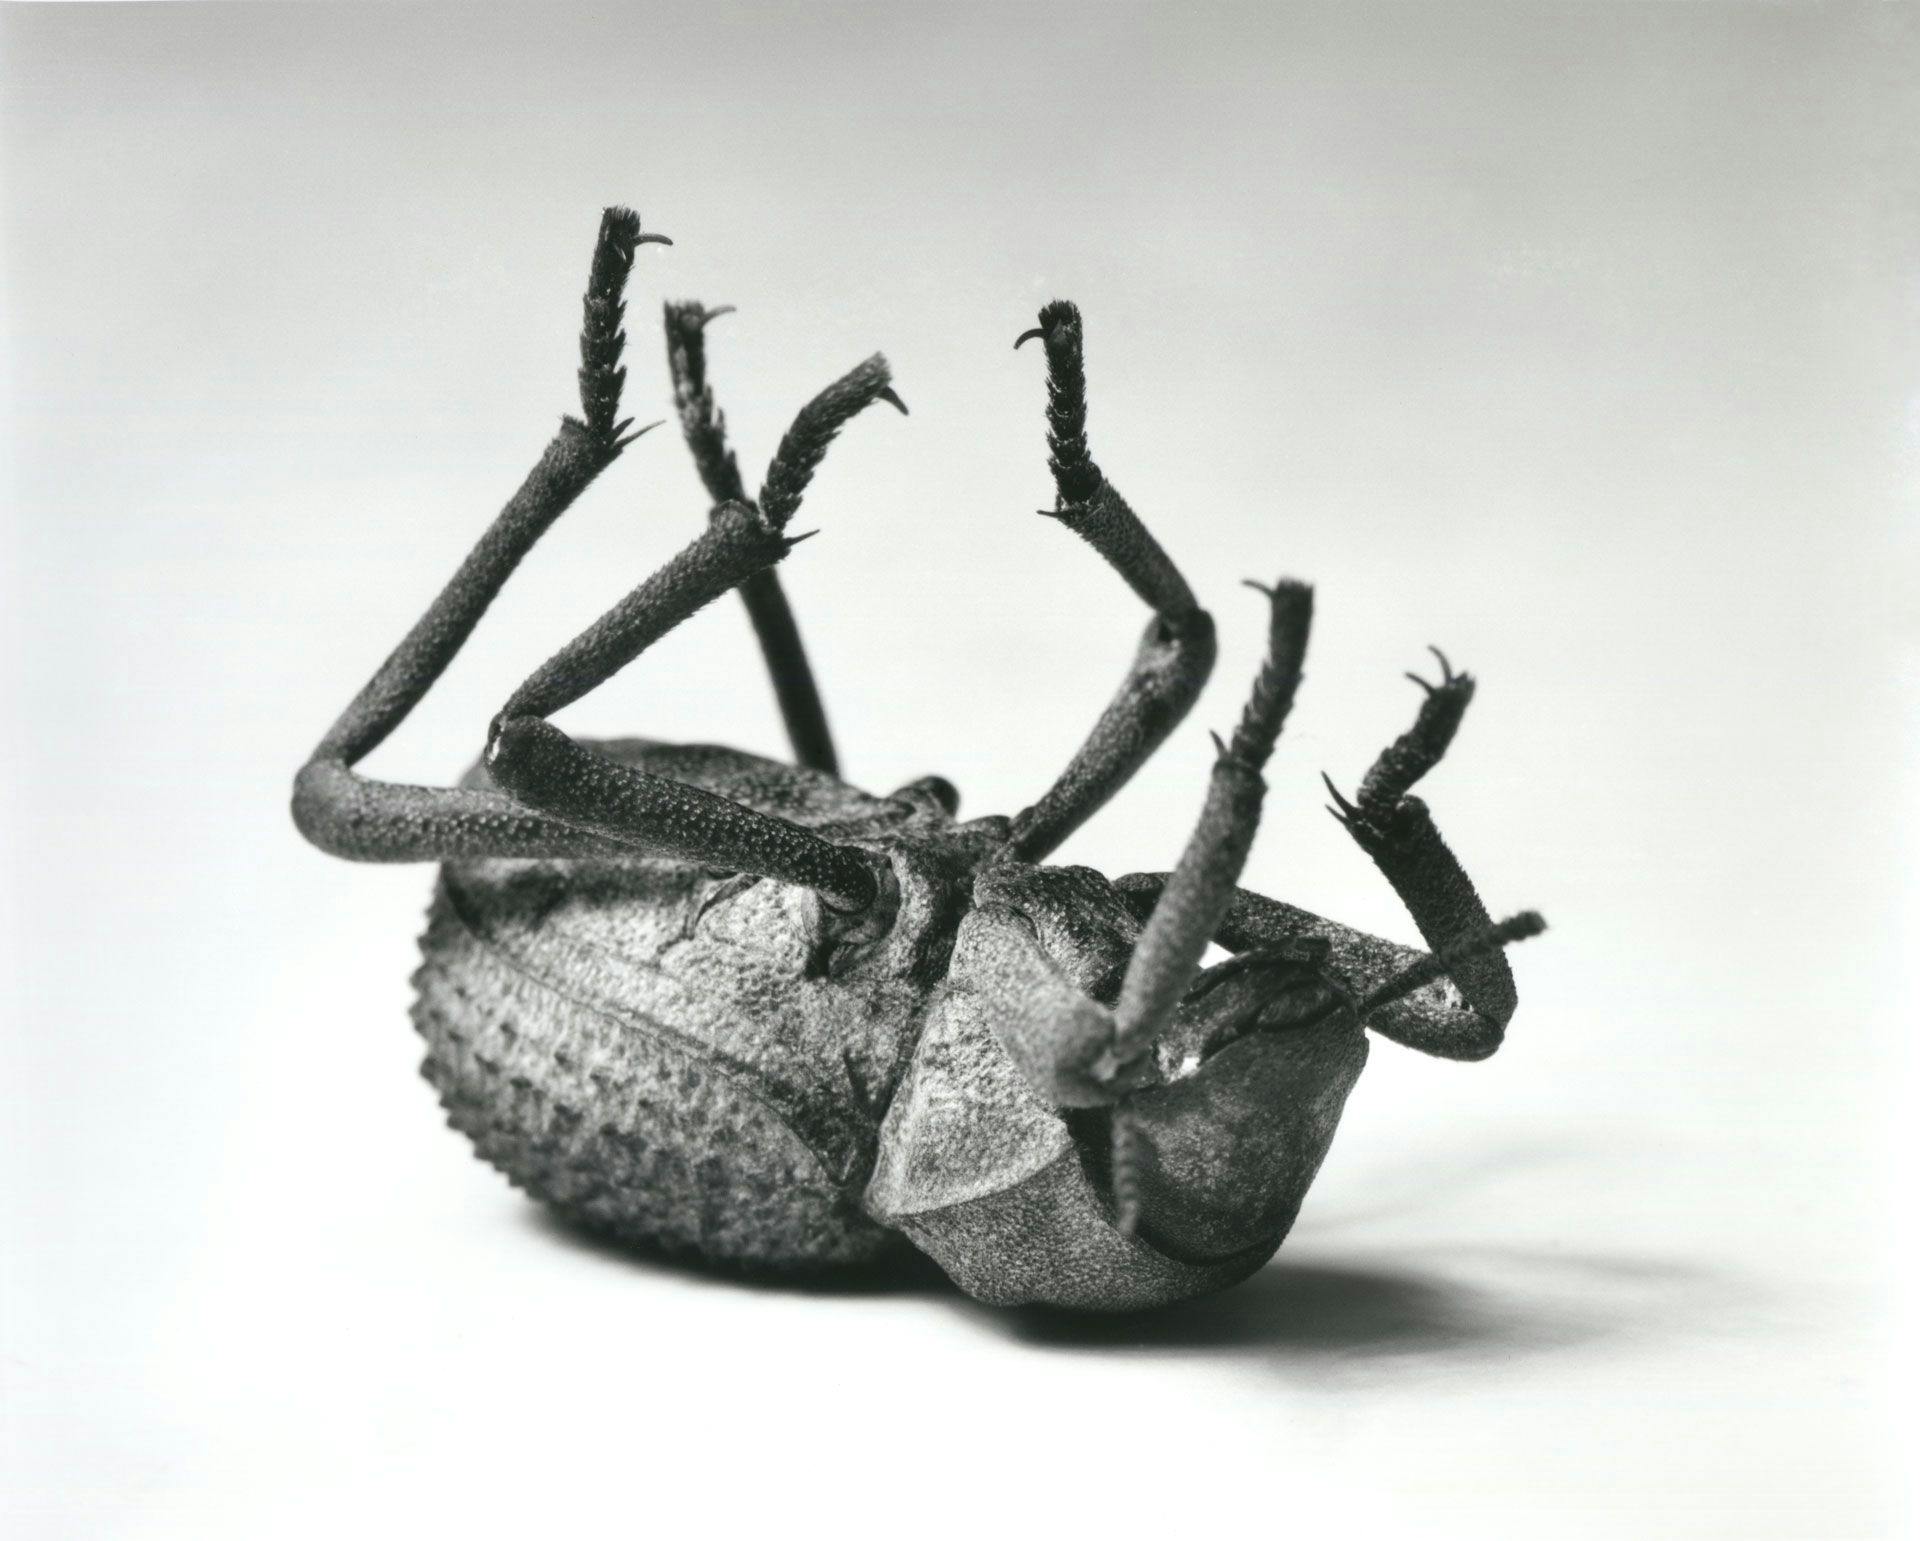 A photograph by Christopher Williams titled Tenebrionidae Asbolus verrucosus Death Feigning Beetle Silverlake, California October 1, 1996, dated 1996..